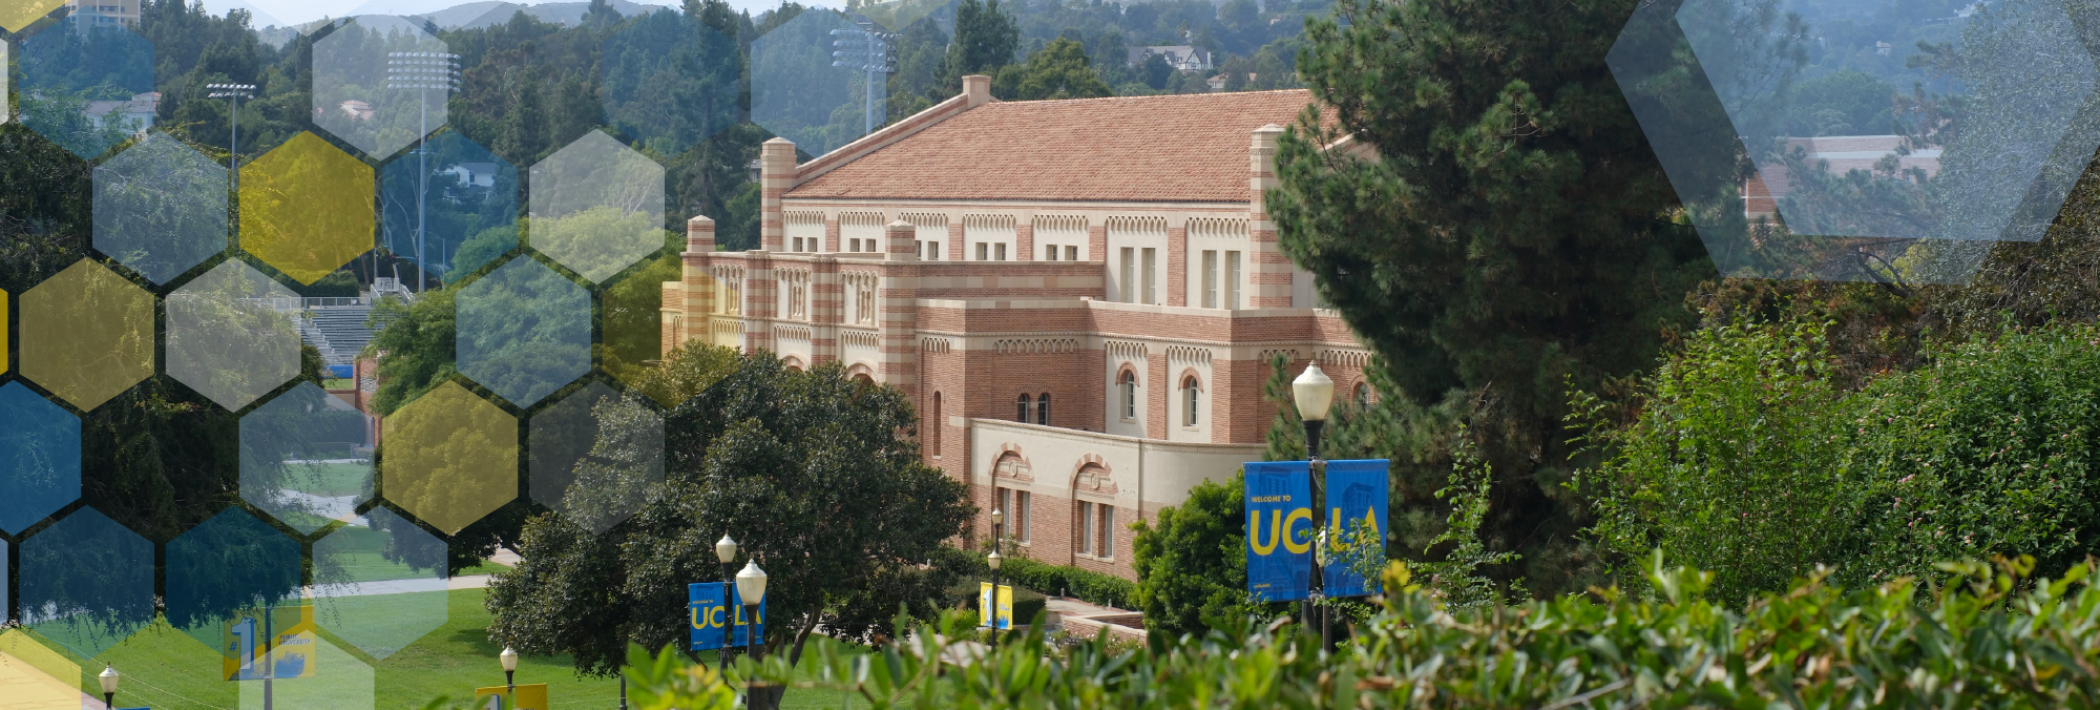 Looking down Janss Steps towards Kaufman Hall with UCLA banners and molecule overlay.